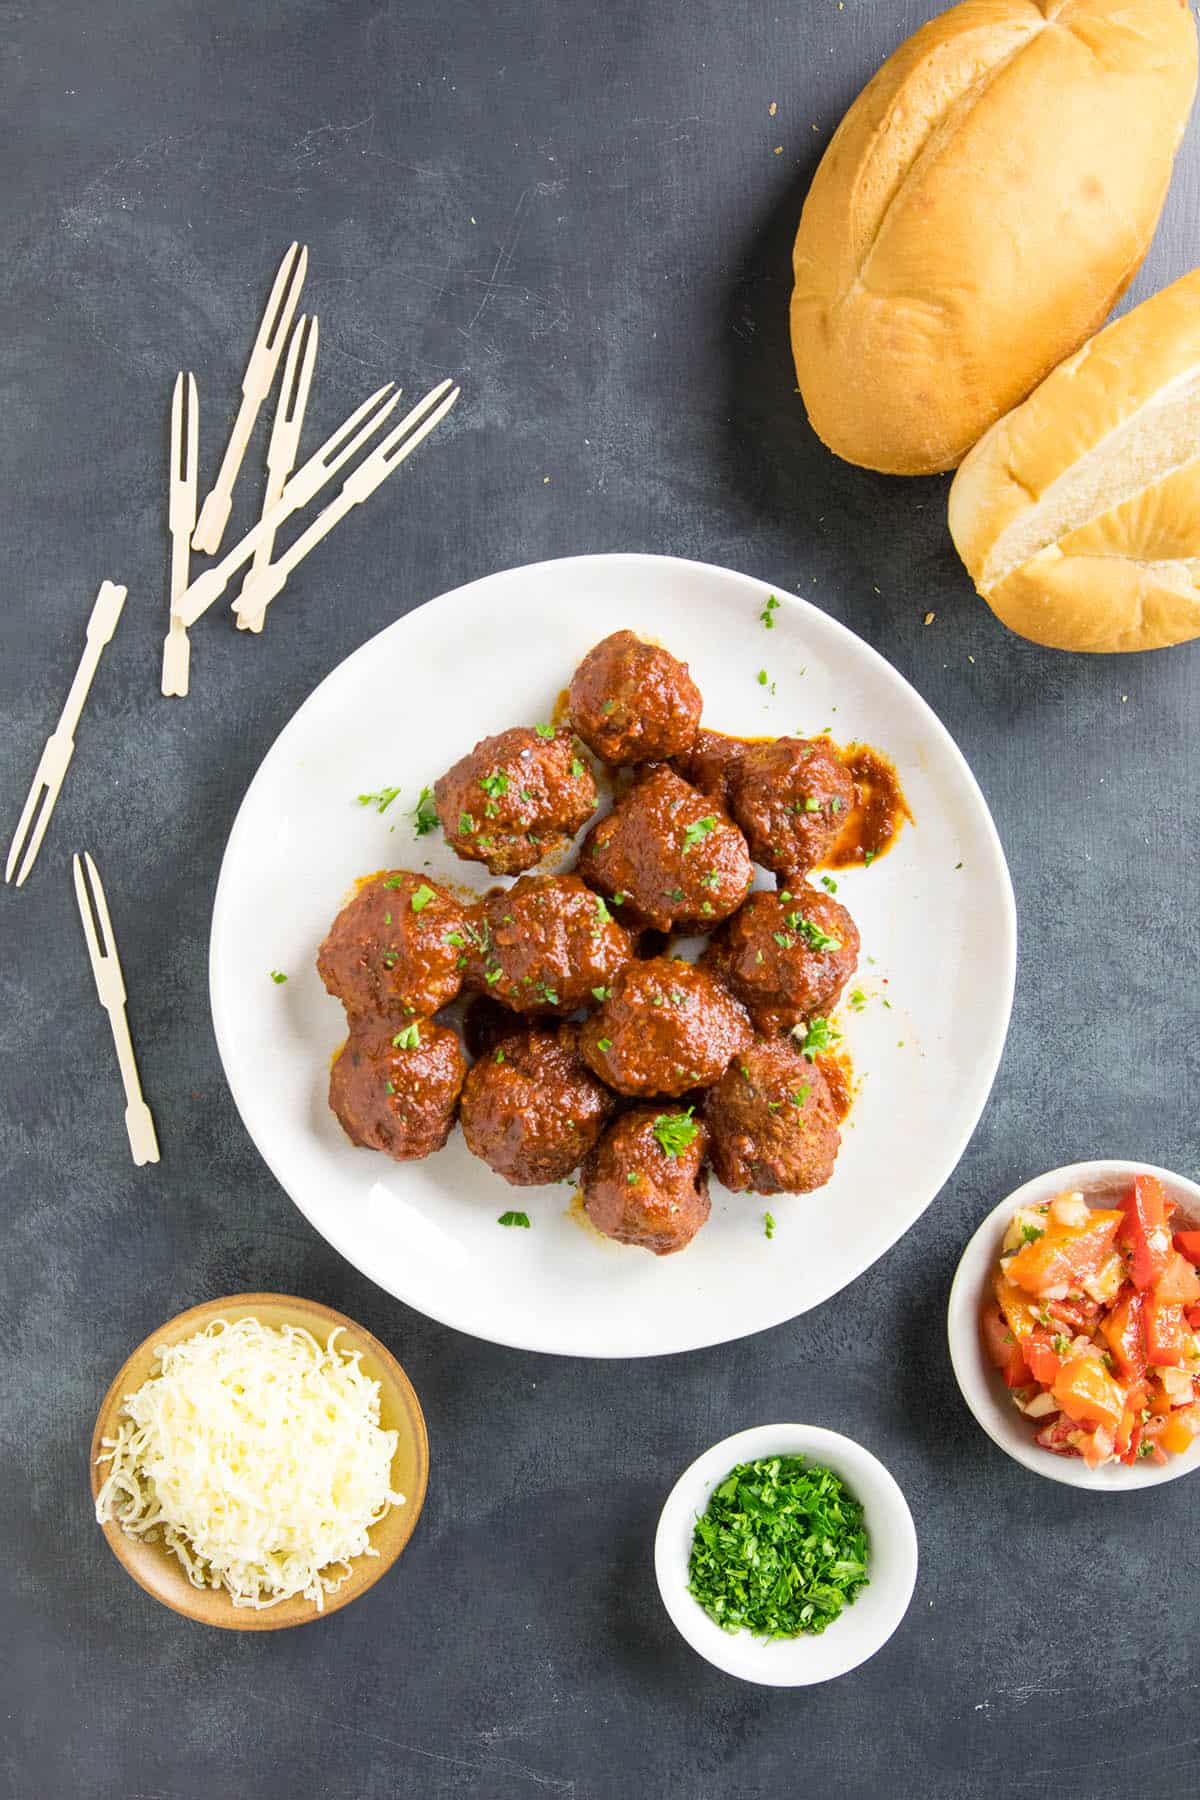 Spicy Meatballs in Chipotle-Lime Sauce served on sandwiches.